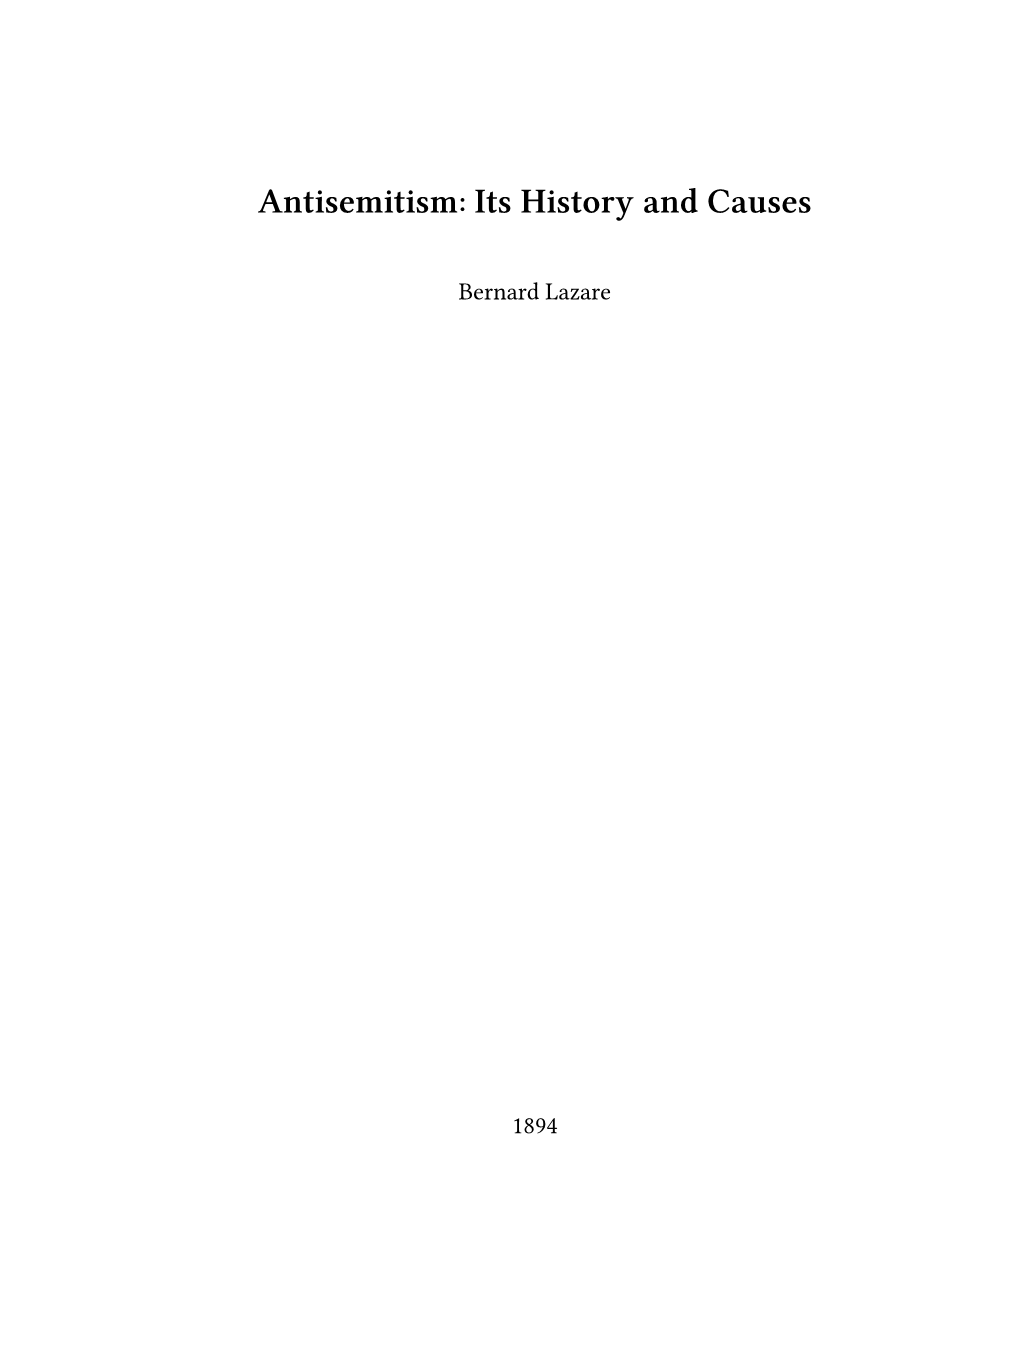 Antisemitism: Its History and Causes